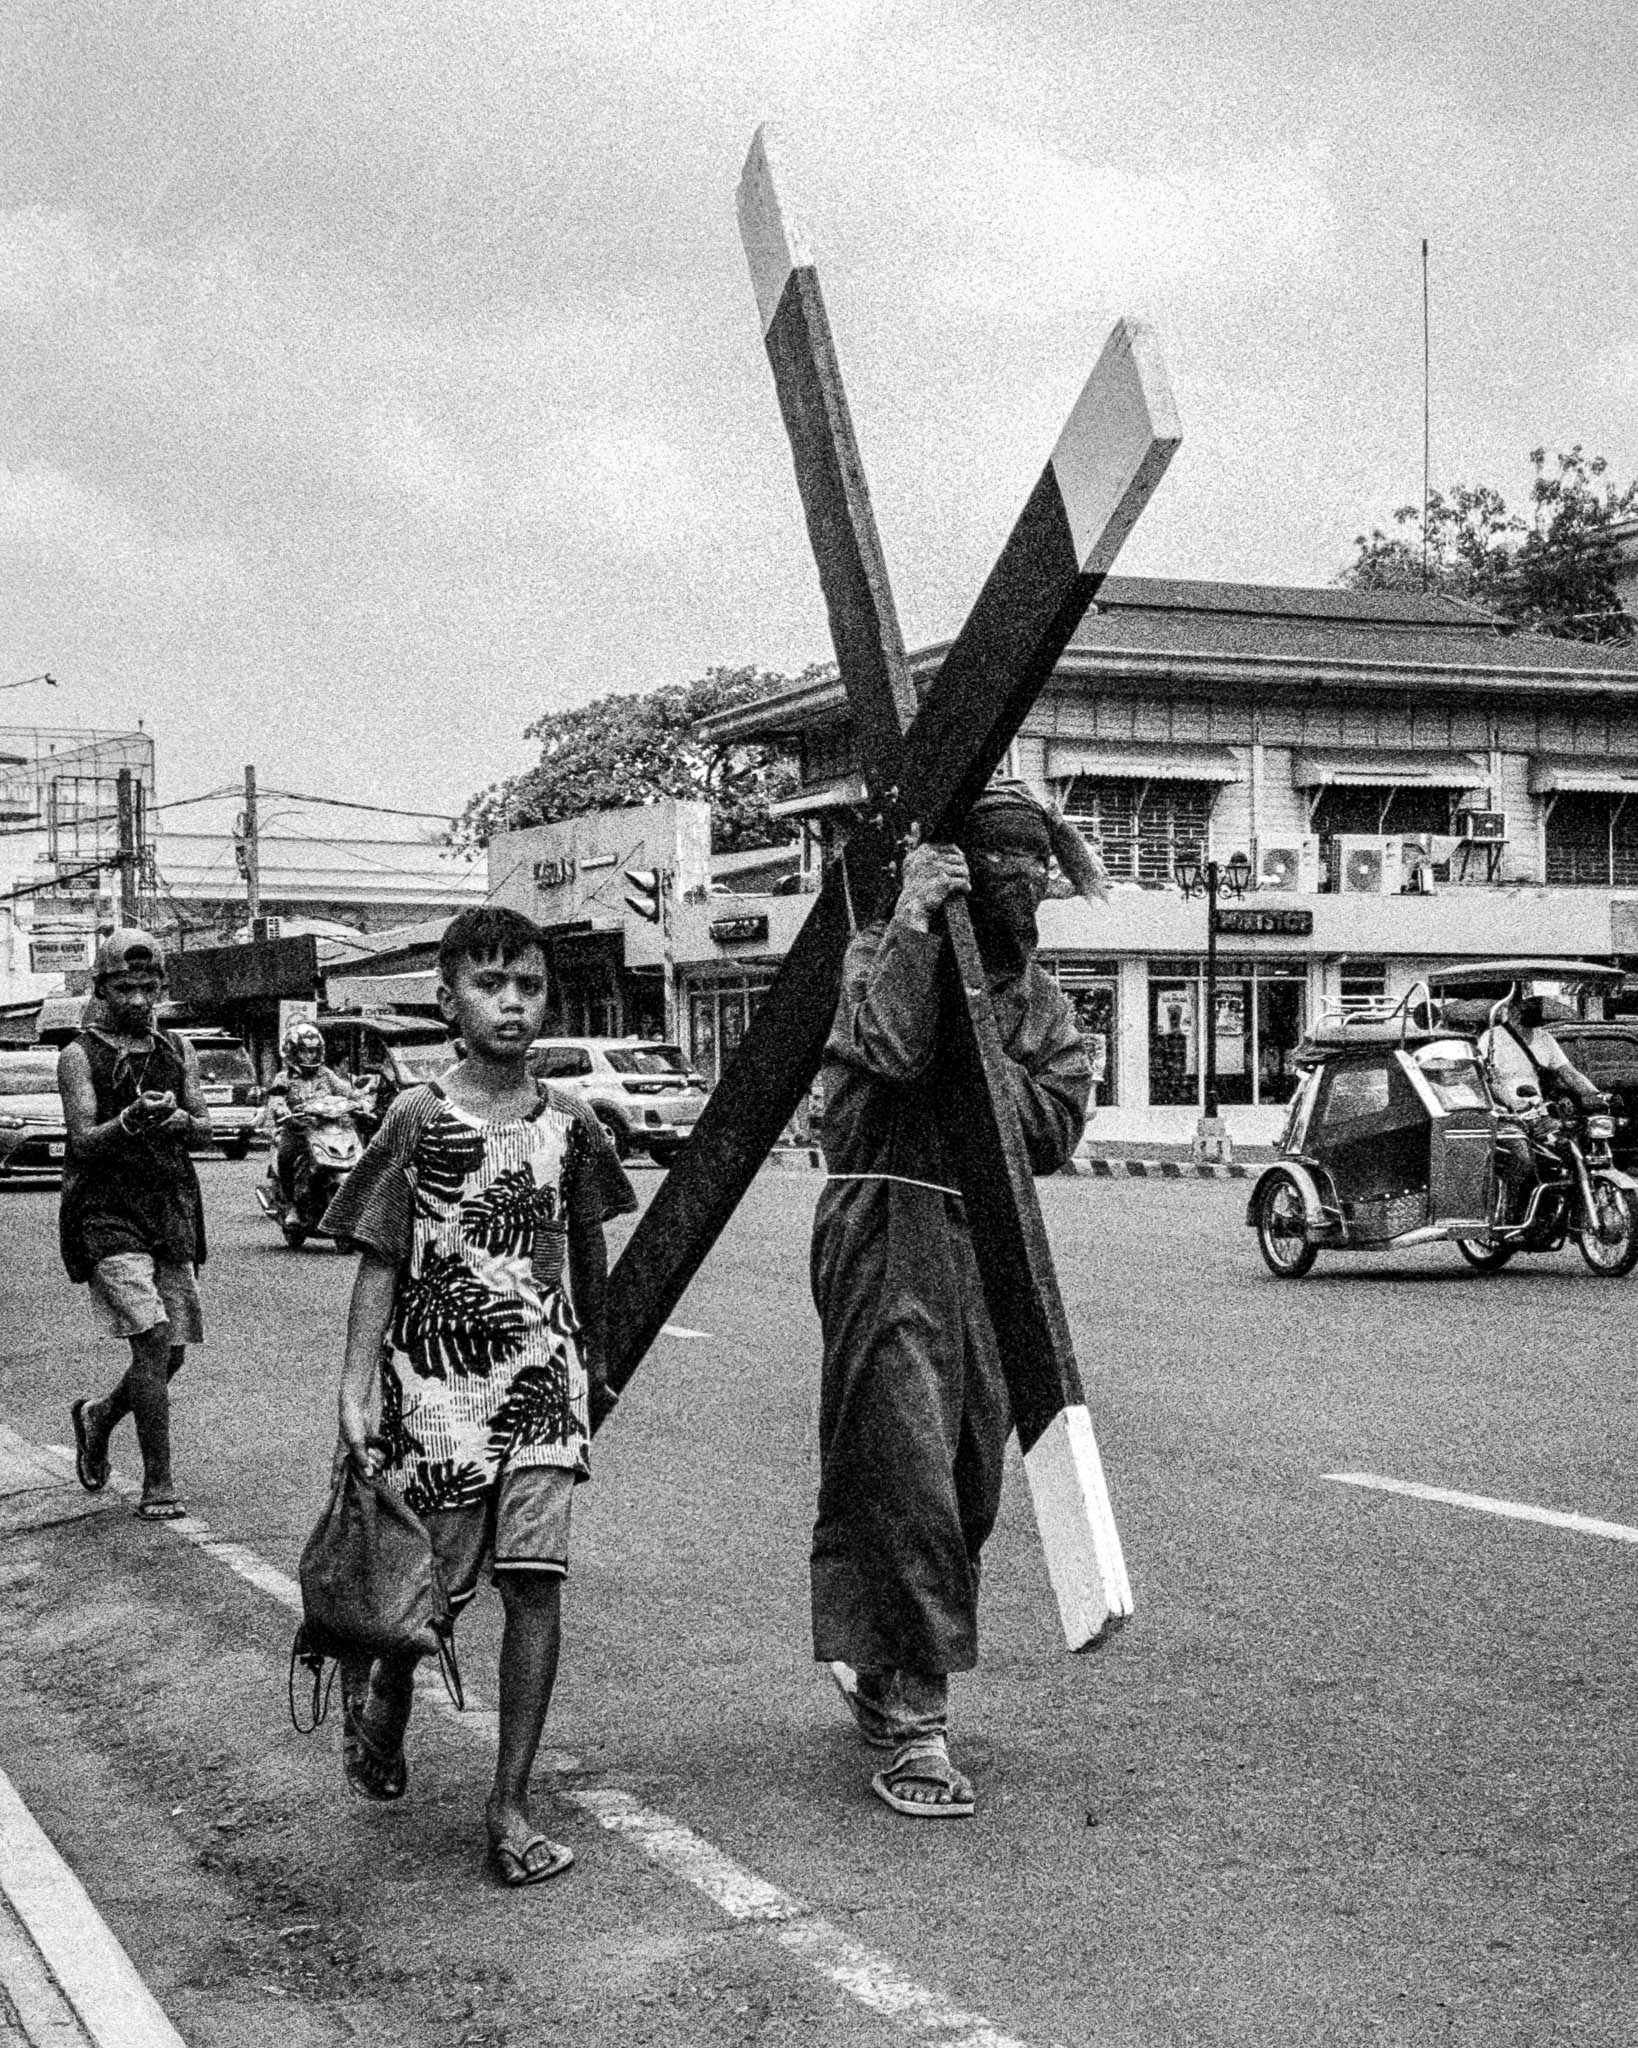 Man carrying large wooden cross in religious ceremony on city street, accompanied by child.